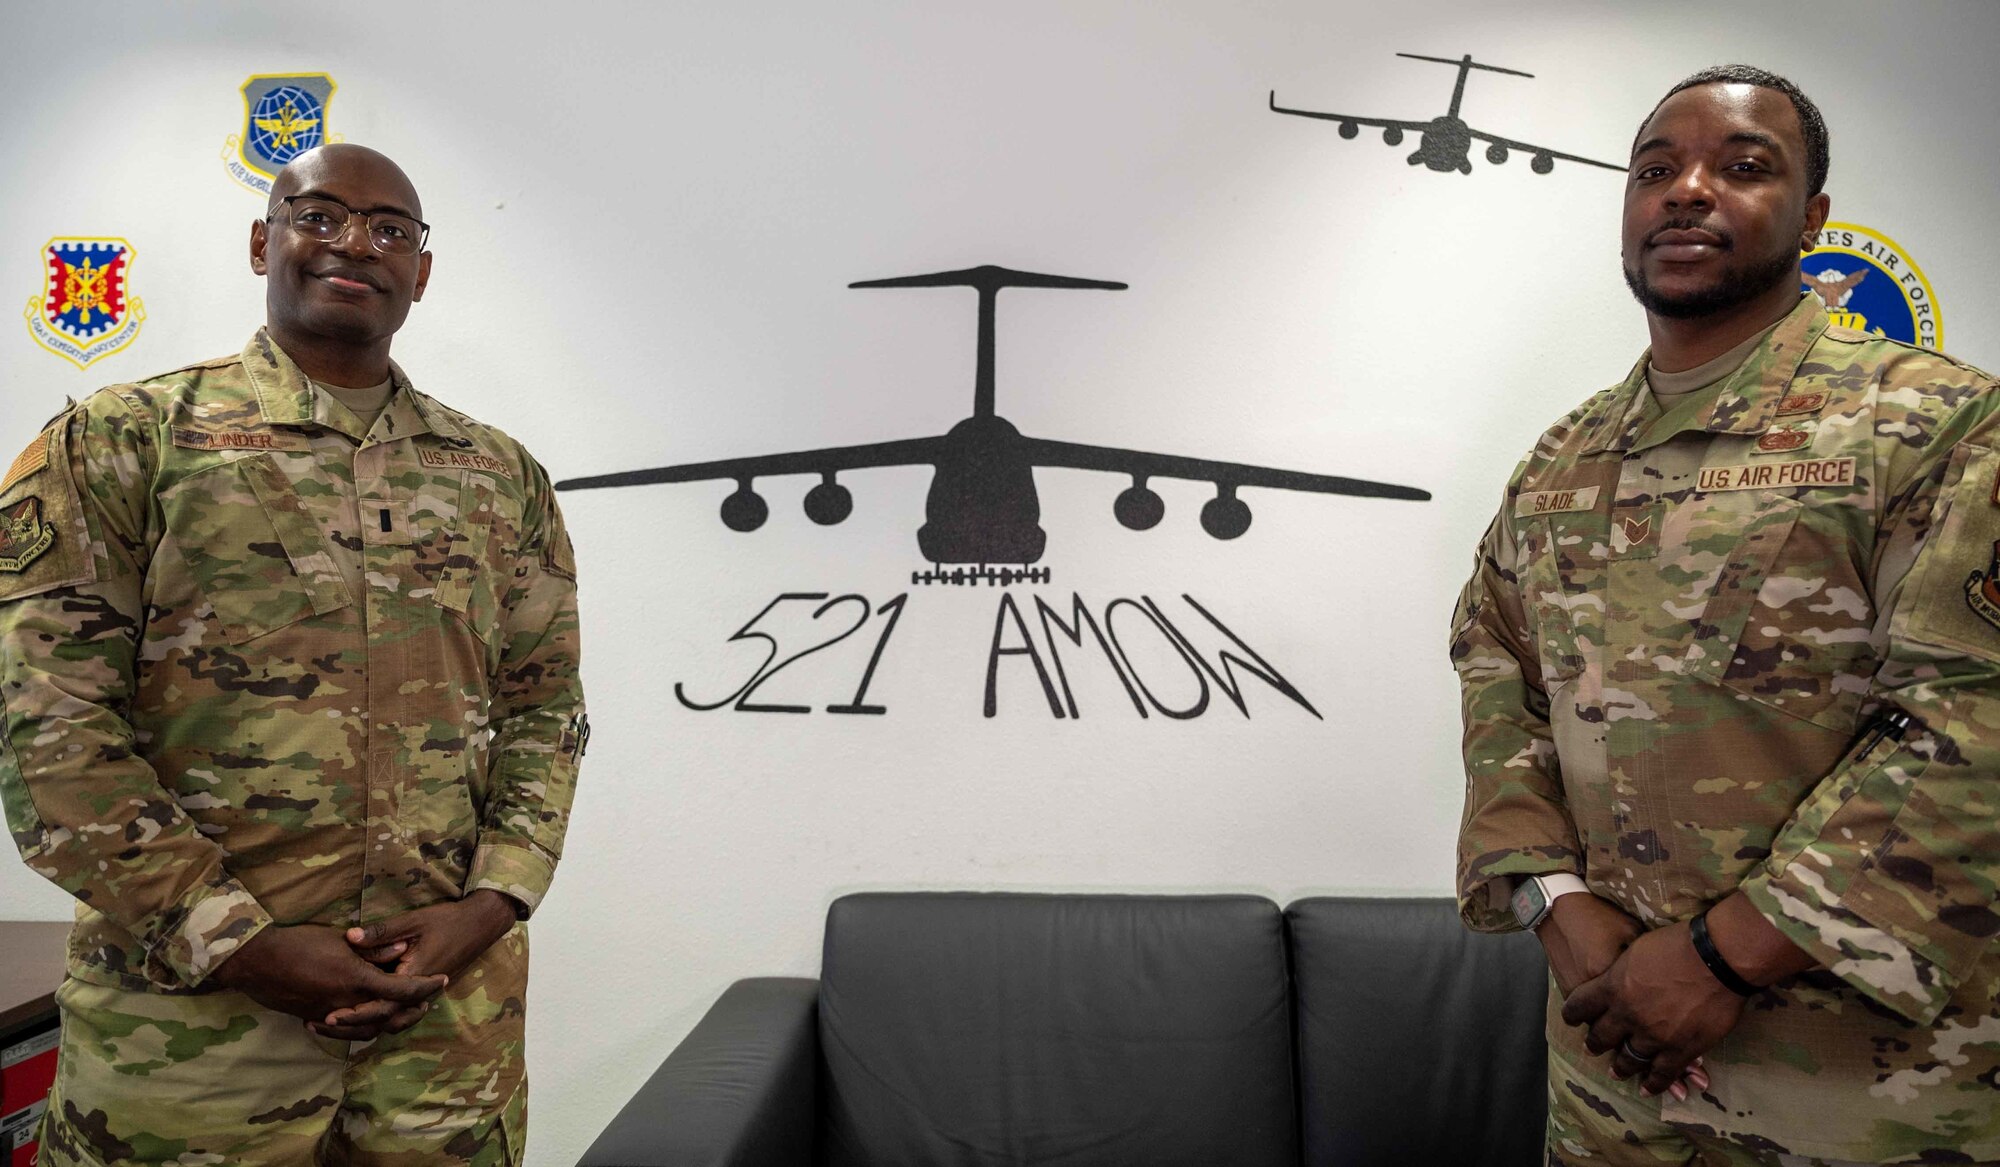 From the right, Tech. Sgt. Marcus Slade, religious affairs airman deployed to the 521st Air Mobility Operations Wing, and 1st Lt. Tarvick Linder, chaplain deployed to the 521st AMOW, pose for a photo at Ramstein Air Base, Mar. 28, 2022. Linder and Slade make up a religious support team that is assigned to the 521st AMOW to actively engage with Airmen, advise leadership, and provide spiritual care that is sensitive to the needs of all members and their families. (U.S. Air Force photo by Senior Airman Faith Schaefer)